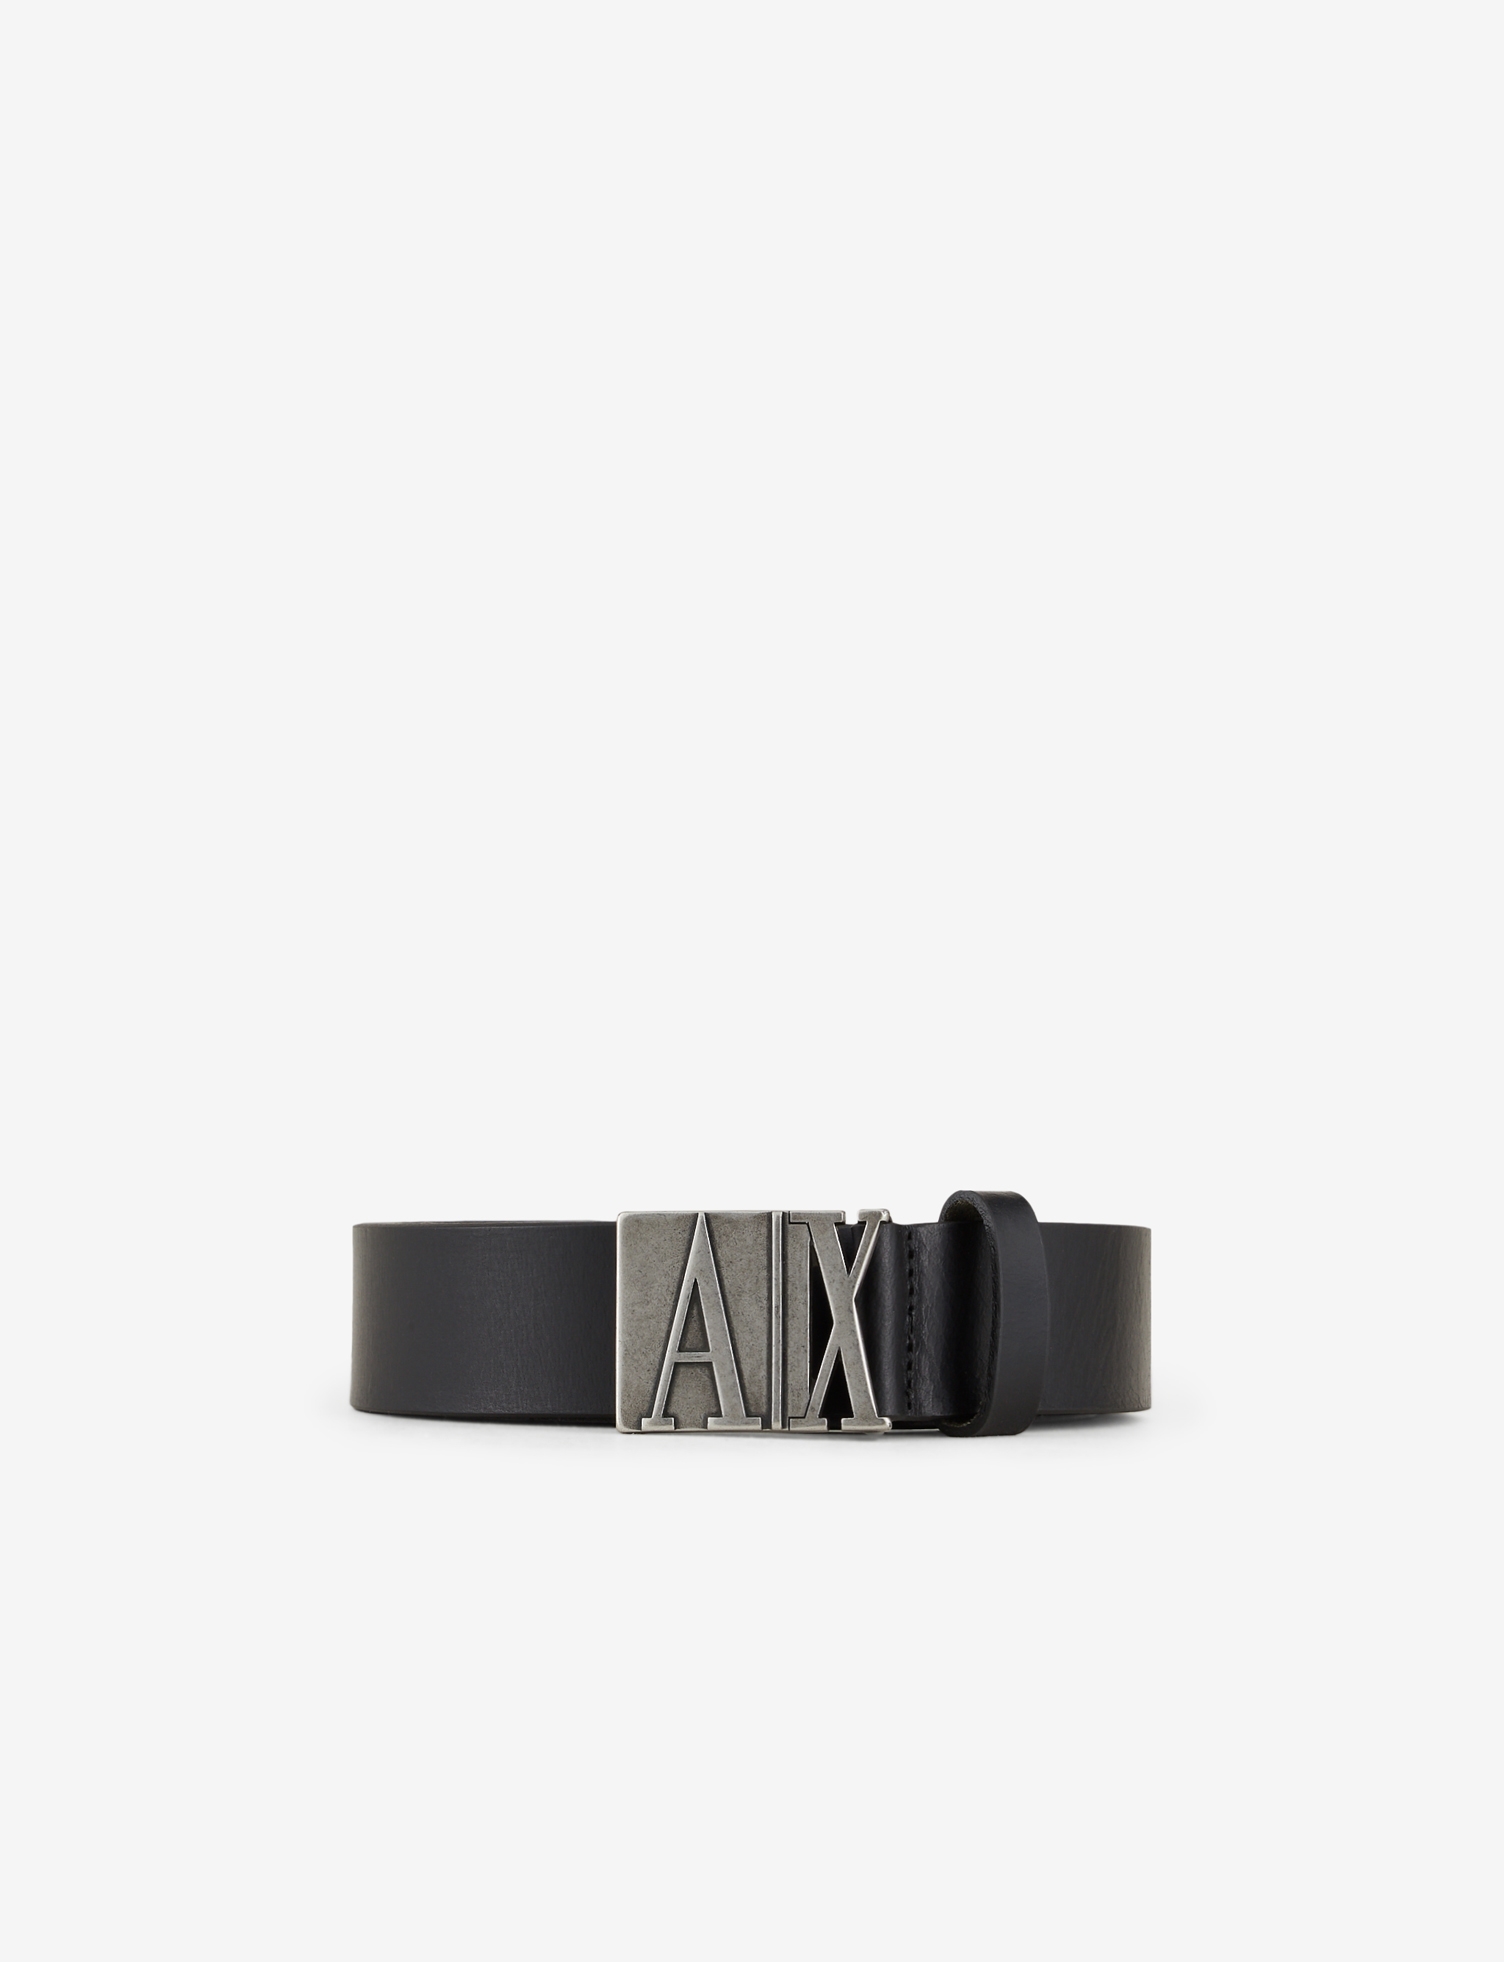 Black Leather Belt with Metal Logo Buckle Closure